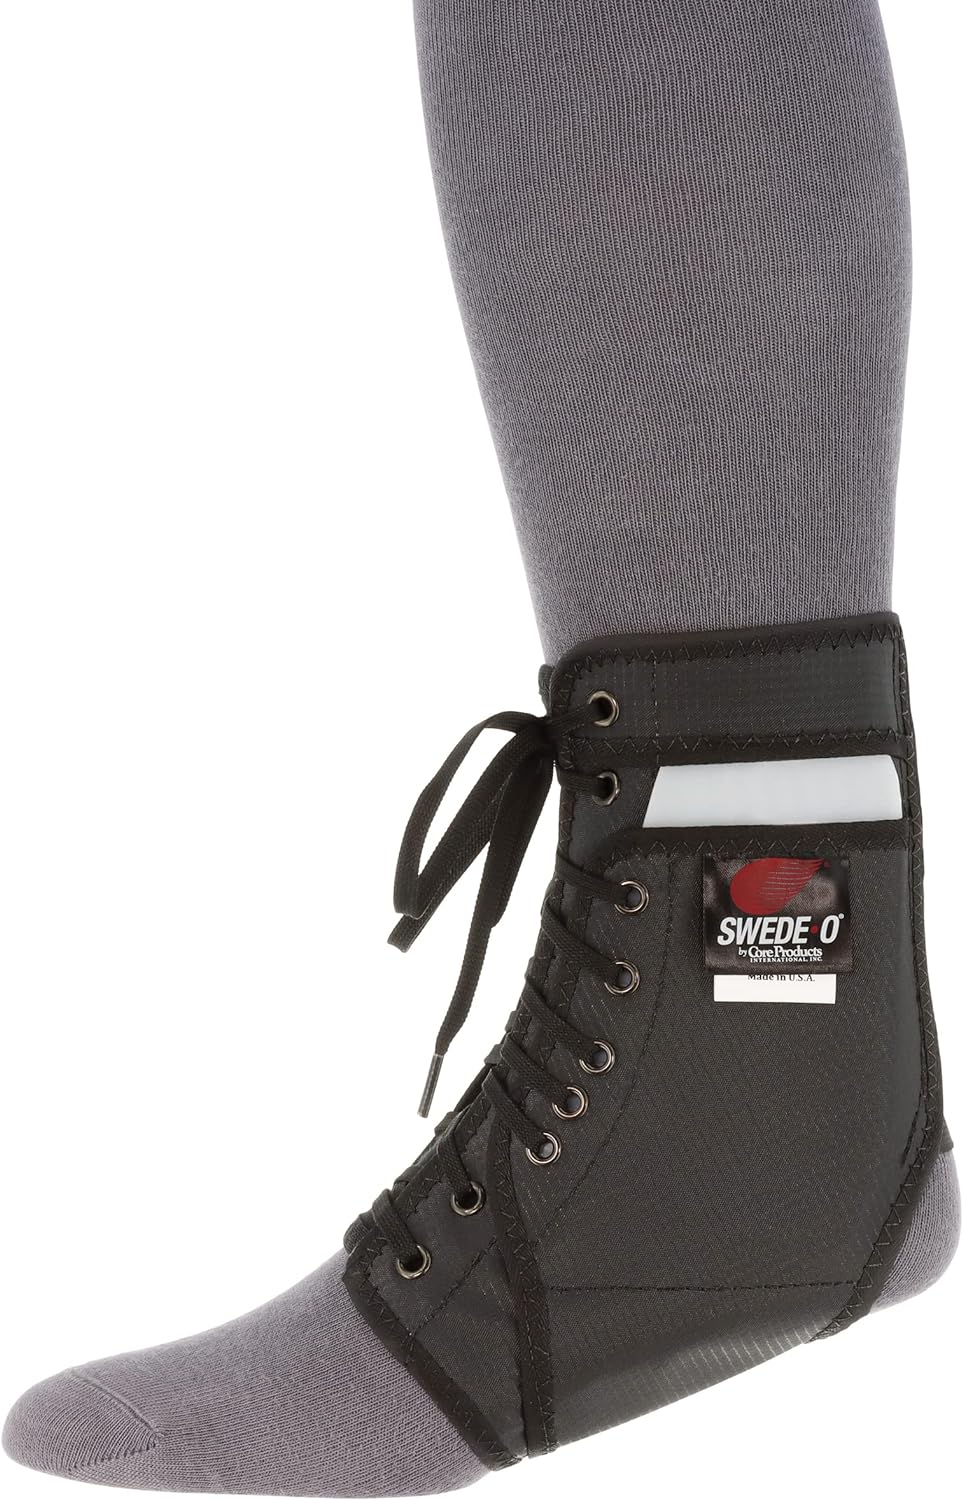 Swede-O Ankle Brace Review